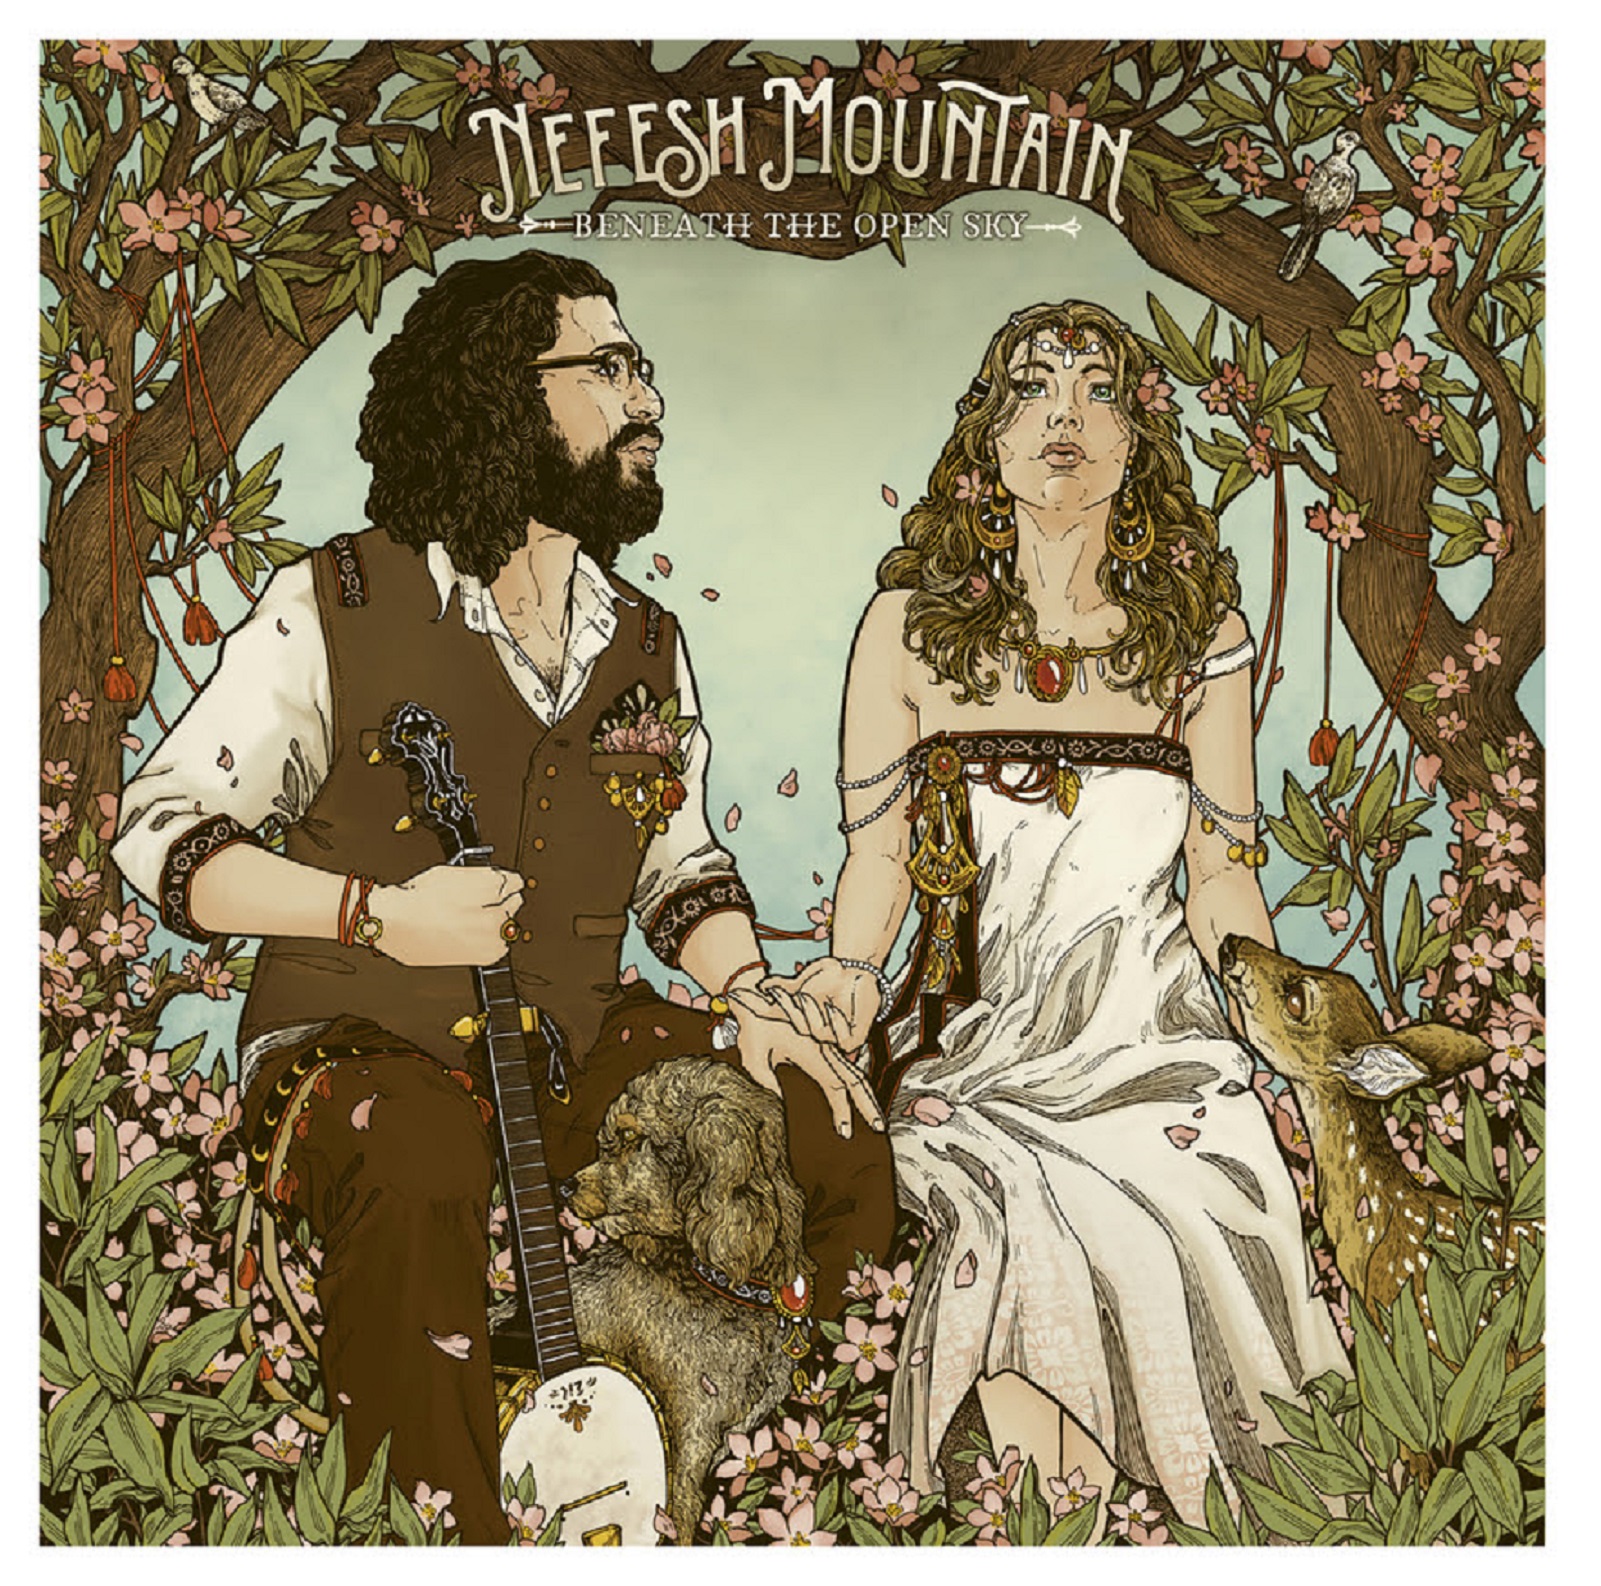 Nefesh Mountain's "Beneath The Open Sky" Available March 2